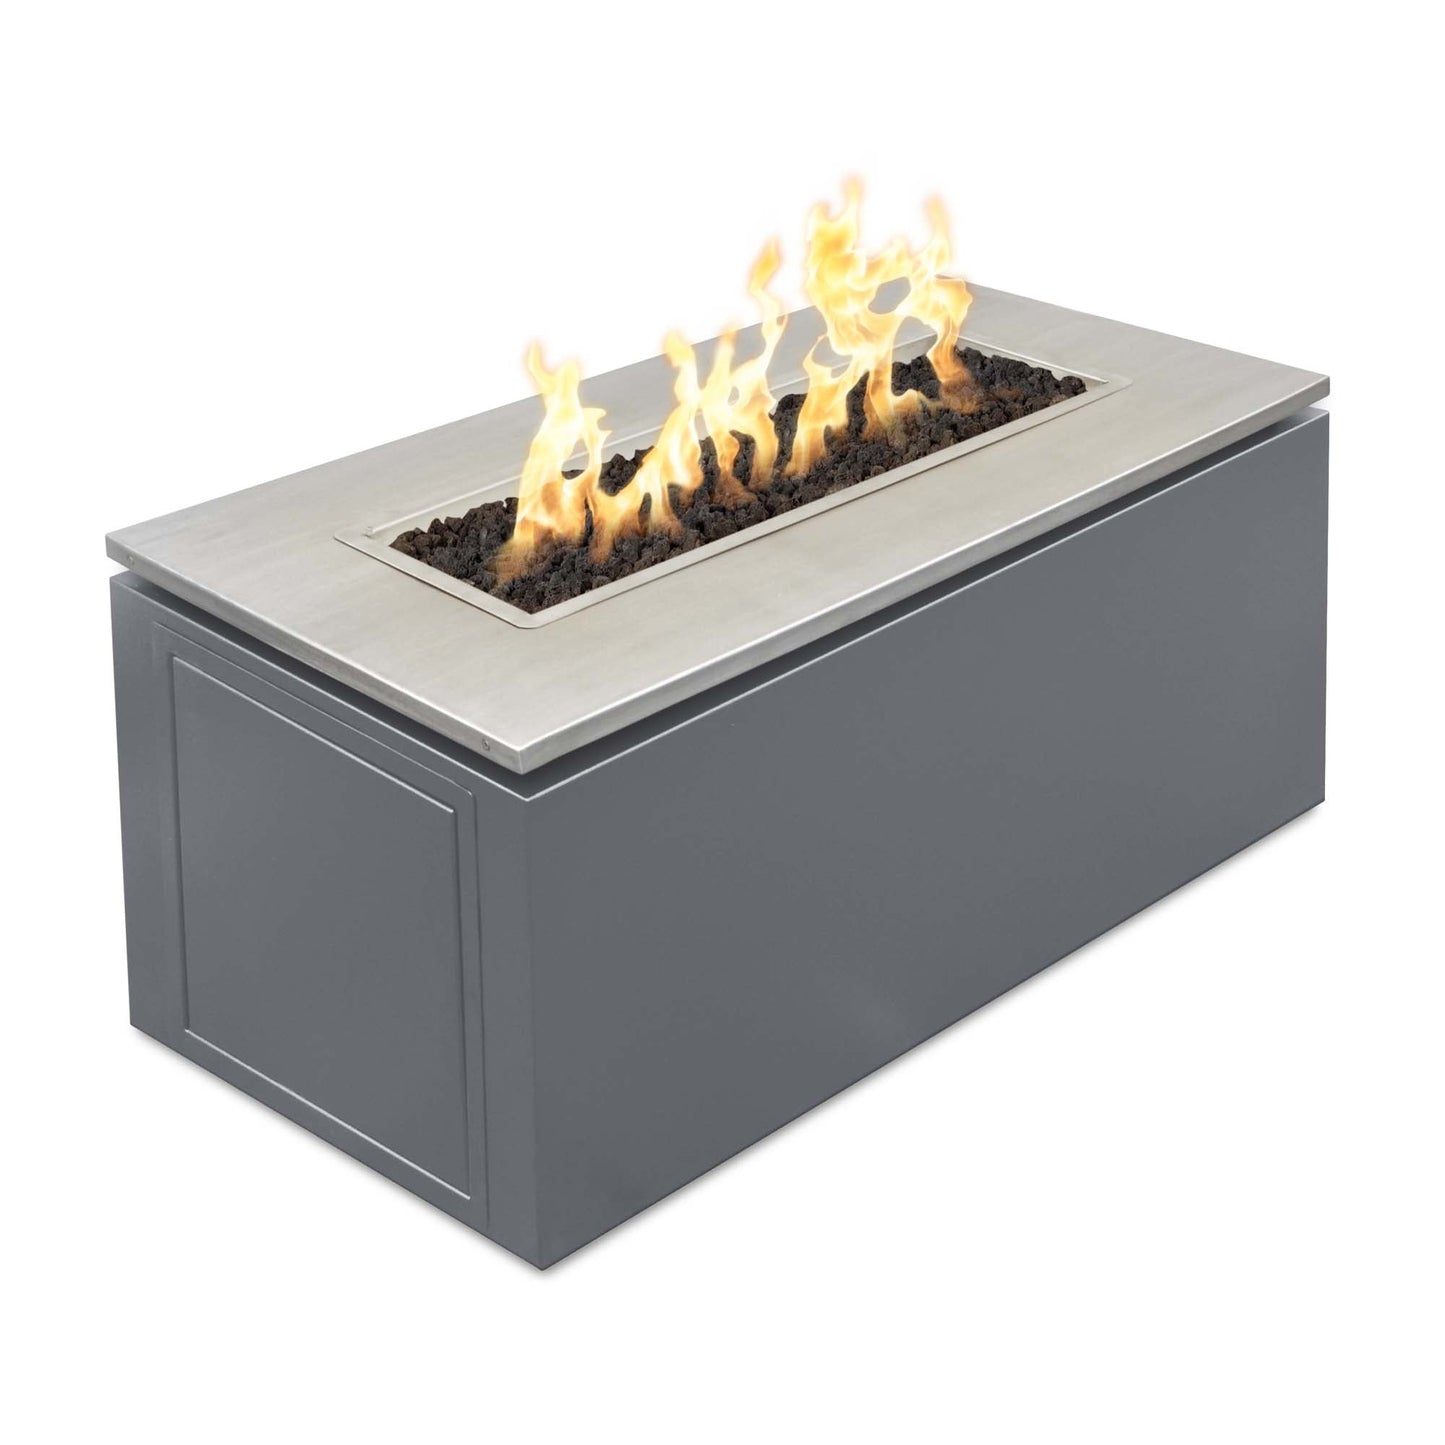 The Outdoor Plus Rectangular Merona 46" Stainless Steel Liquid Propane Fire Pit with Flame Sense with Spark Ignition